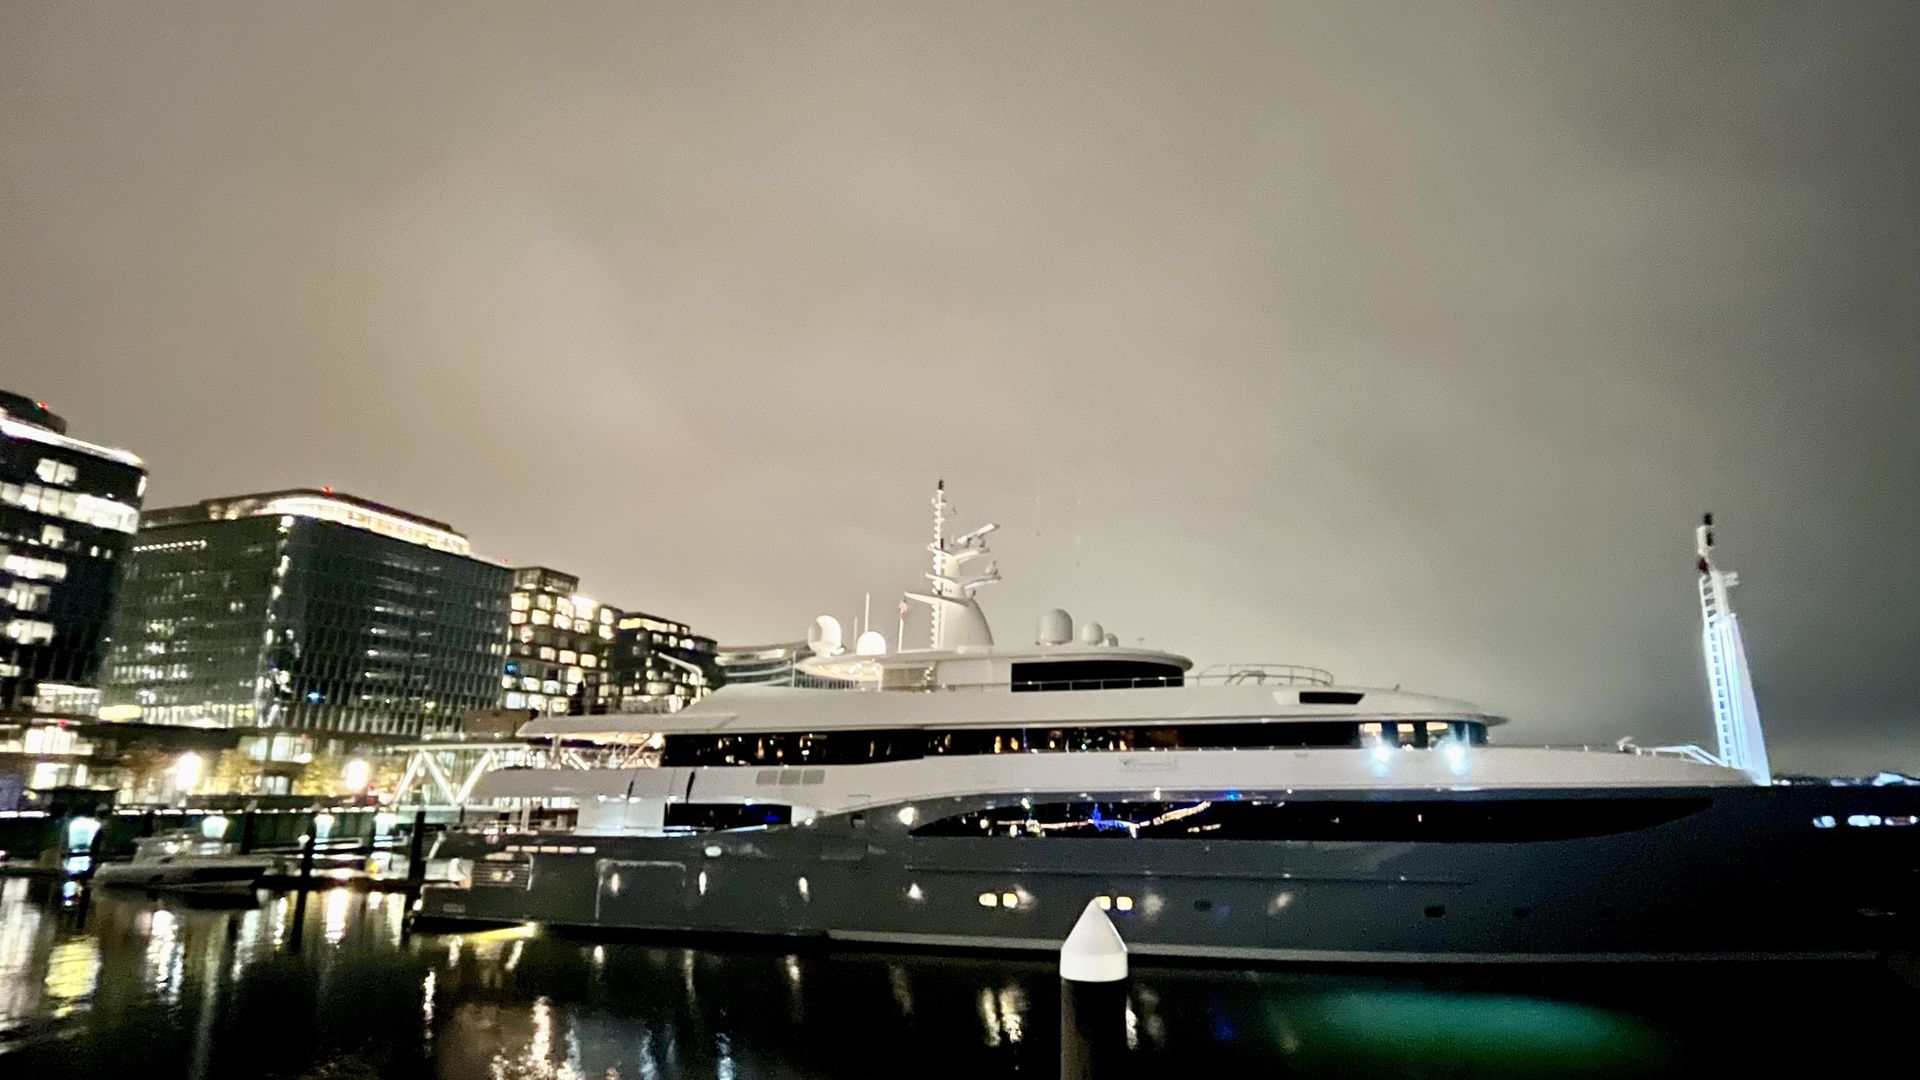 A picture of a superyacht docked at the Wharf at night, with lit buildings in the background